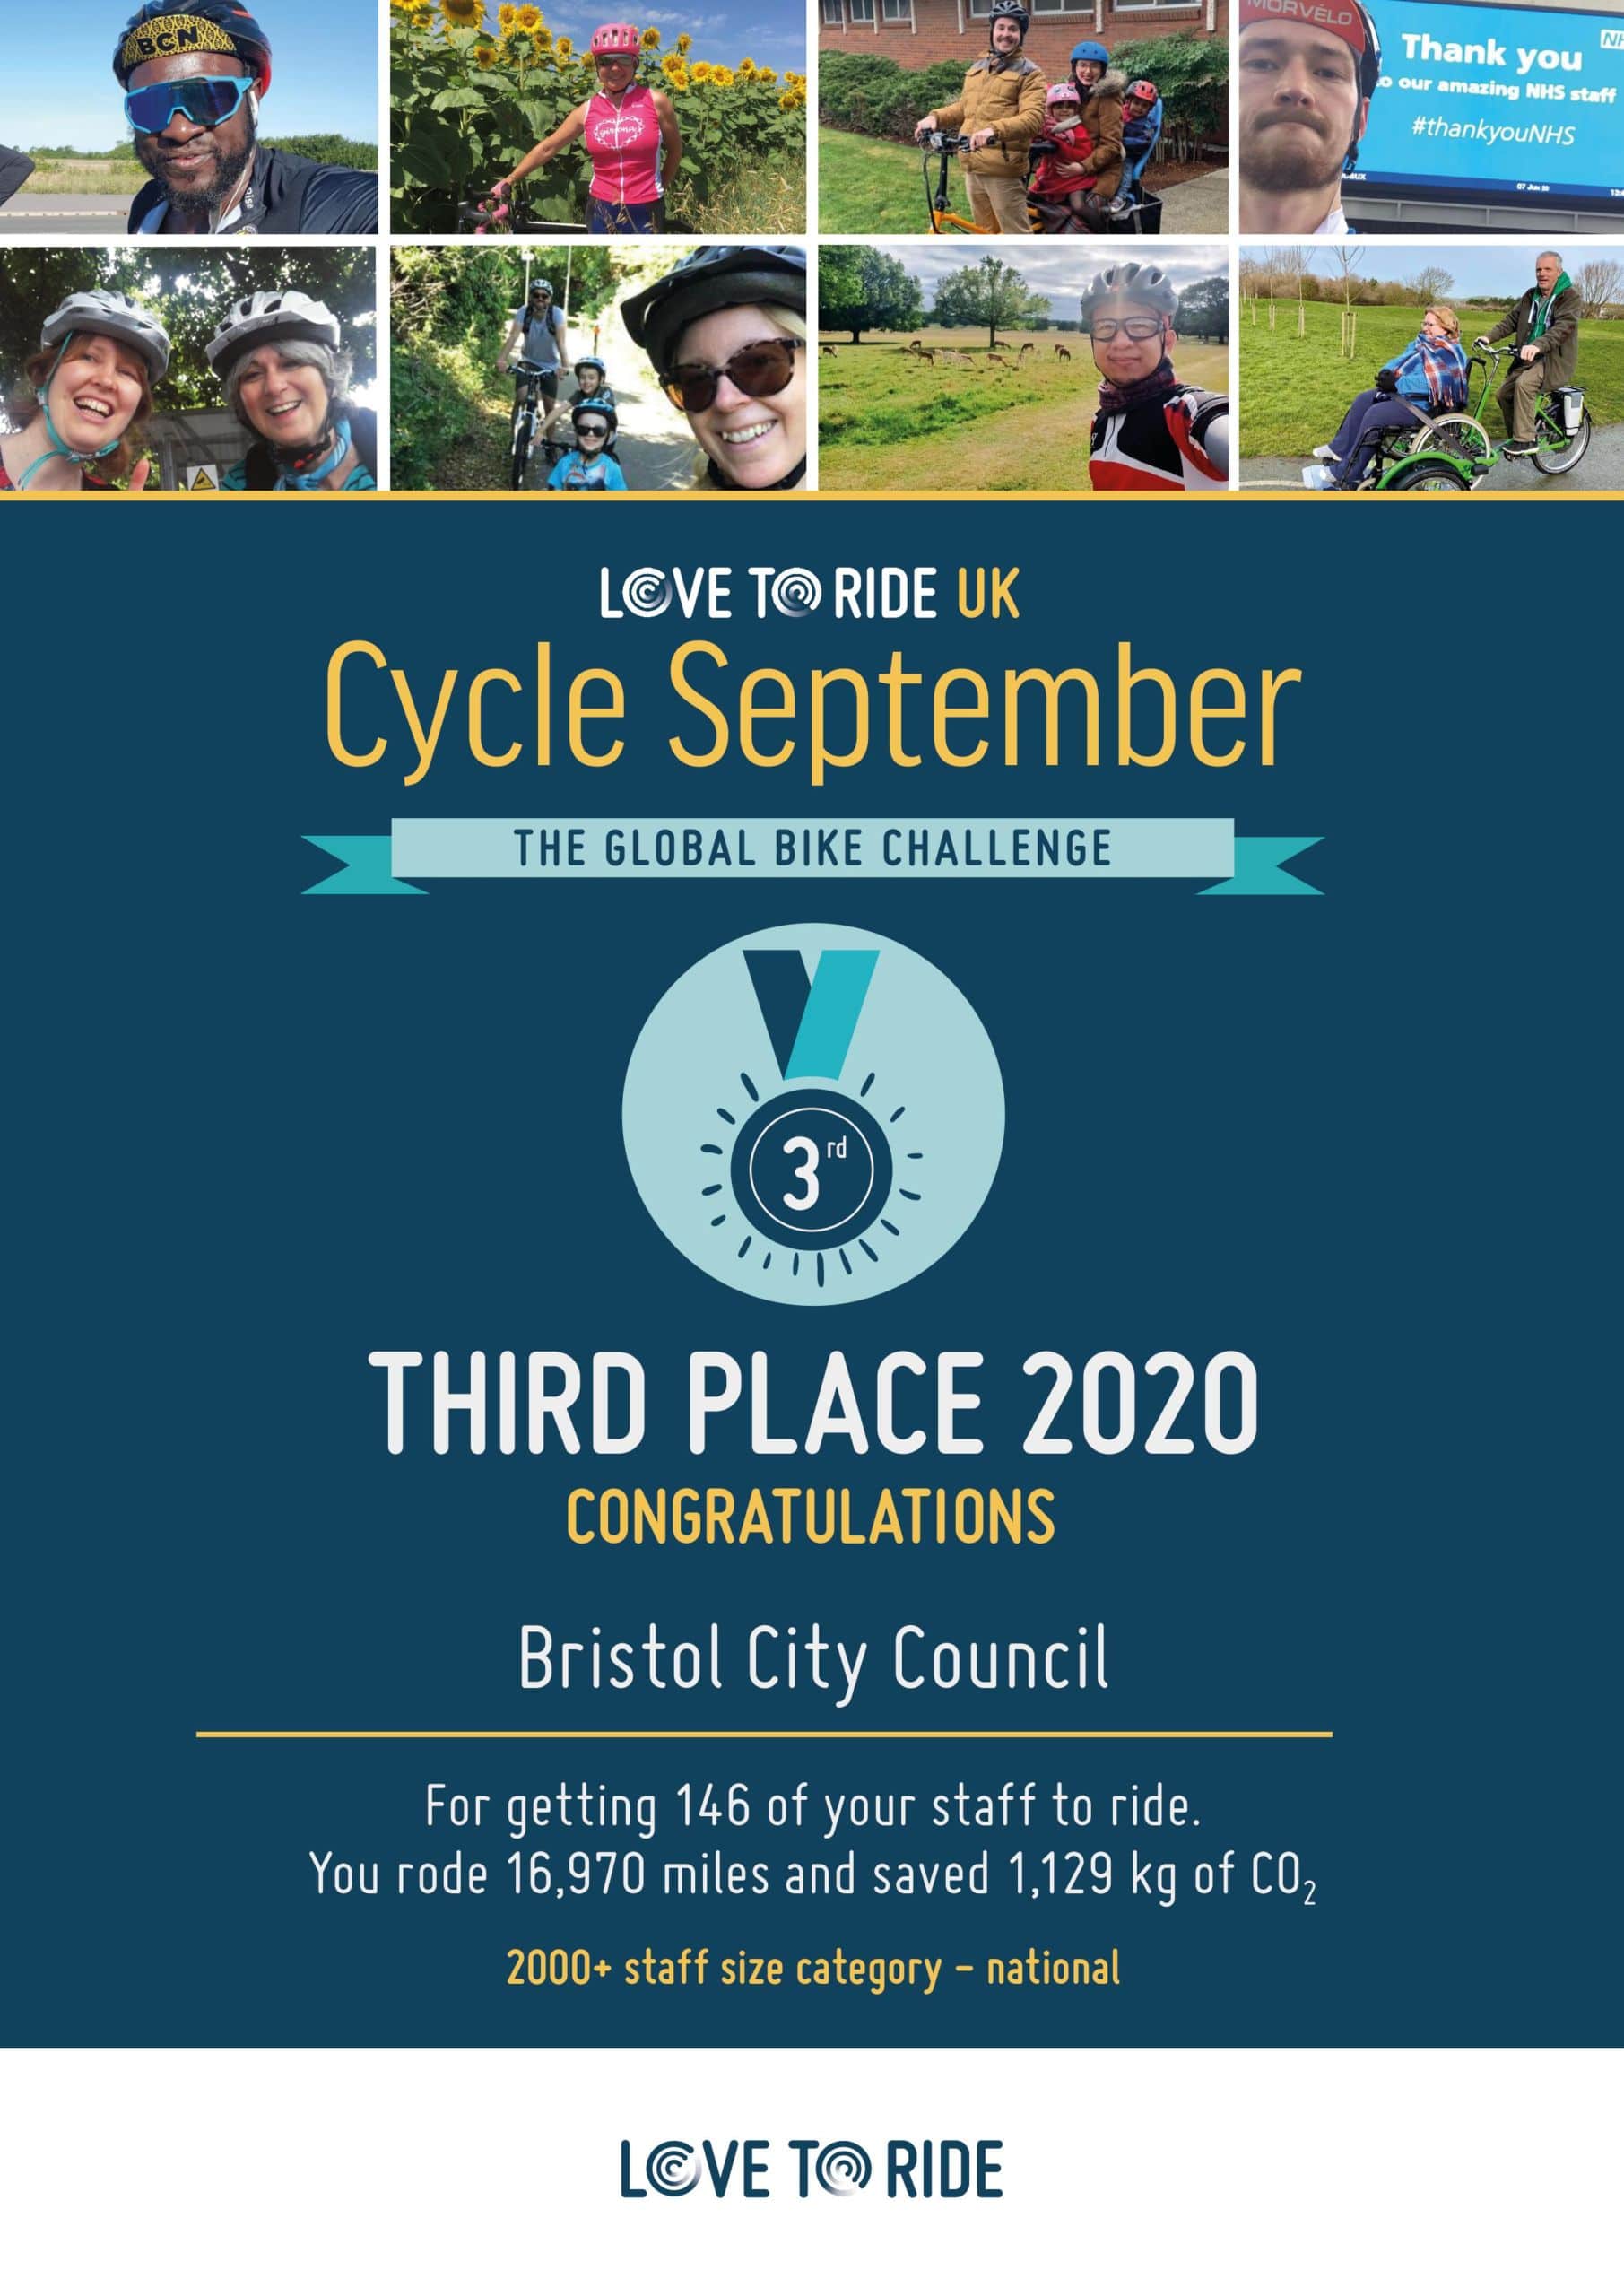 Image of Bristol City Council 3rd place certificate